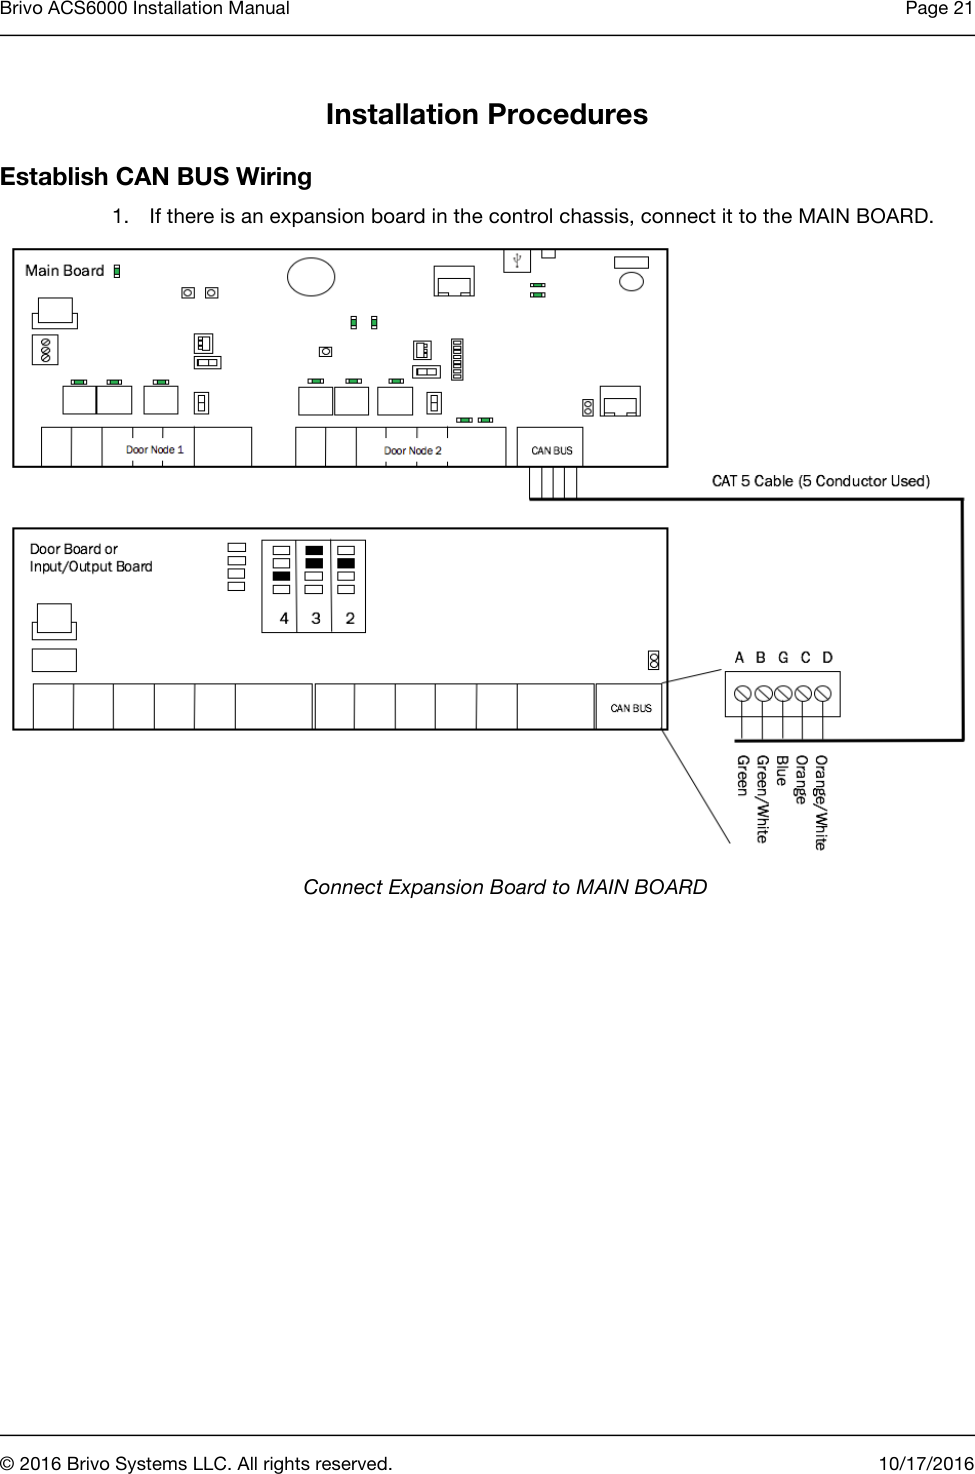 Brivo ACS6000 Installation Manual Page 21      © 2016 Brivo Systems LLC. All rights reserved. 10/17/2016  Installation Procedures Establish CAN BUS Wiring 1. If there is an expansion board in the control chassis, connect it to the MAIN BOARD.  Connect Expansion Board to MAIN BOARD 